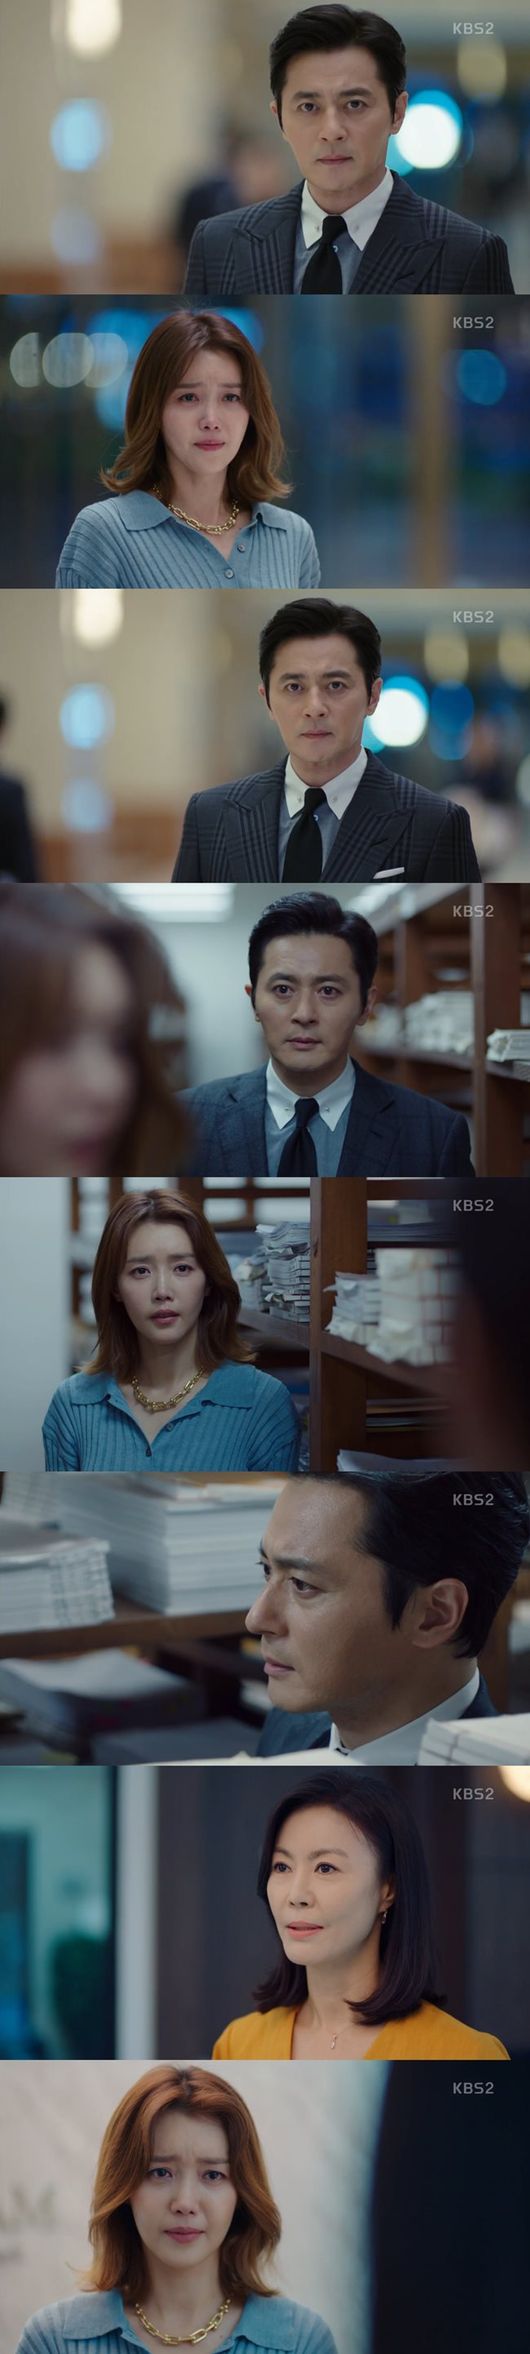 The mistake of Suits Chae Jung-an cost Jang Dong-gun the chance, and Chae Jung-an was eventually fired.Park Hyung-sik and Ko Sung-hee got closer, and started dating.In the 13th KBS 2TV drama Suits (playplayed by Kim Jung-min and directed by Kim Jin-woo) broadcasted on the afternoon of the 6th, Miniforce Seok (Jang Dong-gun) in Danger, Ko Yeon-woo (Park Hyung-sik) and Hong Da-ham (Chae Jung-an) were portrayed to help him.Ham tried to kick out the Miniforce seat, and he fell into Arlington Road.Ko Yeon-u told the Miniforce that they should protect each other.Because Ham (Kim Young-ho) came to see him and asked if he knew the weakness of Miniforce stone.Ko Yeon-u knew that he could be a weakness for the Miniforce seat, so he said they should protect each other.Representative Ham as well as Chae Geun-sik (Choi Kwi-hwa) were also trying to set up a scheme to send out Miniforce seats.Chae Geun-sik worked with Kim Moon-hee (Son Yeo-eun), and Ham was quietly encouraging Chae Geun-sik and Miniforces confrontation.Miniforce and Ko met once again with David Kim (Son Seok-gu) over the Toyota accident lawsuit; Miniforce was put in Danger for the lawsuit.Ham was trying to proceed with the lawsuit to put the Miniforce seat in danger between the Toyota company representative and the company.Miniforce seats were put in a difficult situation because of documents that were not received, and Hong Da-ham (Chae Jung-an) stepped out to find the documents.Ko Yeon-u also wanted to help Miniforce.Although he said it was his job to protect and help Miniforce, Miniforce wanted to stay away from the representative without doing anything.But Ko was not the one to listen to Miniforce. He was trying to find the document with redness.Ko was looking for a problematic report, a person who wrote the Memoir of War, to resolve the lawsuit.Ko found the Memoir of War, found out the address and informed Miniforce.He was proud that he helped Miniforce, and Miniforce was also delighted with the performance of Ko Yeon-woo.The relationship between Ko Yeon-woo and Ji-na Kim (Ko Sung-hee) has become more and more intense.Ji-na Kim pretended to be a friend of Ko Yeon-woo, who did not contact him and broke his promise, but Ko Yeon-woo felt nervous about Ji-na Kim who worried about him.The relationship between the two became more intense, and Ji-na Kim became more and more inclined to go.Ko Yeon-woo introduced Ji-na Kim to Grandmas Boy; Ji-na Kim became a special being to Ko Yeon-woo.Ji-na Kim introduced herself to Grandmas Boy and became more and more concerned about Ko Yeon-woo, who said she was a special person.Ko looked lovingly at Ji-na Kim, who is well suited to Grandmas Boy, and felt pleasant happiness.Ko confessed to Ji-na Kim frankly: I care about Ji-na Kim and I want to know more.Ji-na Kim expressed his favorite heart by kissing the figure of such a good actor first.The relationship between Ko Yeon-u and Ji-na Kim was getting stronger and stronger.Miniforce was in Danger despite Kos help: finding Memoir of War, which he thought had never seen before.The writer of Memoir of War, which Ko Yeon-woo found, denied that he was not a Memoir of War.It was his explanation that the content of Memoir of War, although not Memoir of War he wrote, was true.It was David Kims Arlington Road, which eventually prevented Miniforce from perjury, and tried to incriminate him.Miniforce Seok wanted the CEO of the Toyota company to recognize the defects directly and to reach an agreement with the bereaved family.He persuaded Seo to do so, and tried to withdraw the lawsuits filed against him and the company.Miniforce still thought that Memoir of War did not exist, but Hong Da-ham confirmed the existence of Memoir of War and reproached himself.Ko Yeon-woo found such a redness strange, and he could see that it found Memoir of War.Ko wanted to tell Miniforce that Hongdaham had found Memoir of War, but Hongdaham wanted to pretend not to know Memoir of War to protect Miniforce seats even though he knew his mistake.It was revealed that Hong Da-ham knew Ko Yeon-woos secret. Chae Geun-sik was listening to Miniforces room. He had caught Miniforces weakness.In the end, Ham found out that the company was sued.As soon as Hong Da-ham tried to reveal the fact about Memoir of War to Miniforce Seok, he and Kang Ha-yeon (Jin Hee-kyung) came to Miniforce Seok and the opportunity was lost.Ham suggested that we overcome Danger together, but Miniforce still did not believe him.The redness that witnessed Danger was again troubled.Ko Yeon-woo also learned that Hong Da-ham didnt tell Miniforce the truth.Ham reached an agreement, and Miniforce tried to sign a statement that he had never seen Memoir of War.Ko Yeon-woo stopped the moment and told the truth about Hong Da-sung.Hongdaham pressed the Hongdaham, why he had found Memoir of War but had hidden the facts, explaining that it was to protect him from Miniforce.Hong Da-ham admitted to the mistake and reproached himself, but Miniforce explained that the discovery of the fake Memoir of War itself was evidence that he was trying to frame him.But the redness was already the situation that had eliminated Memoir of War, thinking about the situation where Miniforce seats would be difficult.Hong Da-ham was fired. Miniforce told Kang Ha-yeon the truth and said he would fire Hong Da-ham himself.However, Kang Ha-yeon knew the relationship between Miniforce and Hongdaham, so he informed him of his dismissal.I was grateful to the Hong Da-ham for doing my job well, and I was more sorry because I believed in each other.KBS 2TV Broadcast Screen Capture